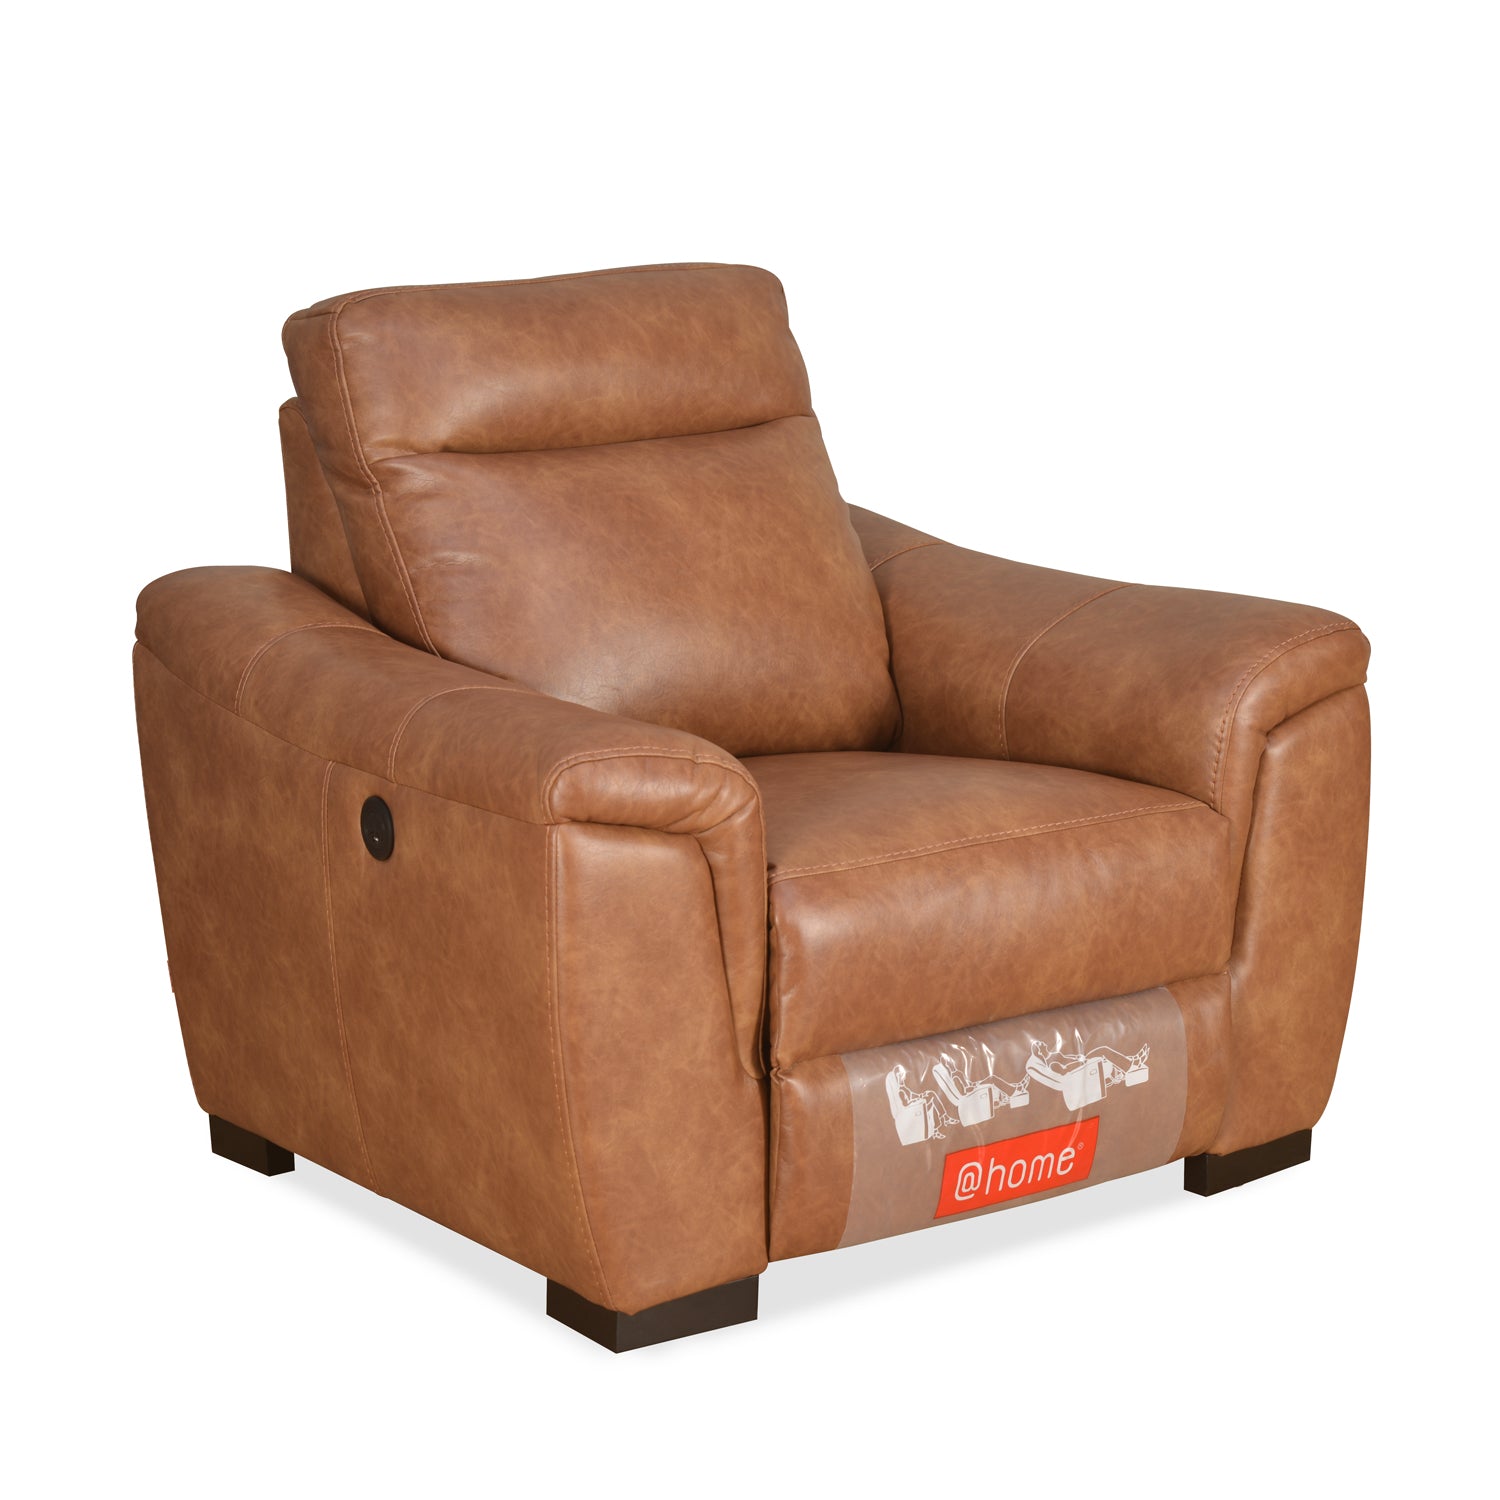 Evelyn 1 Seater Sofa Electrical Recliner (Tan Brown)